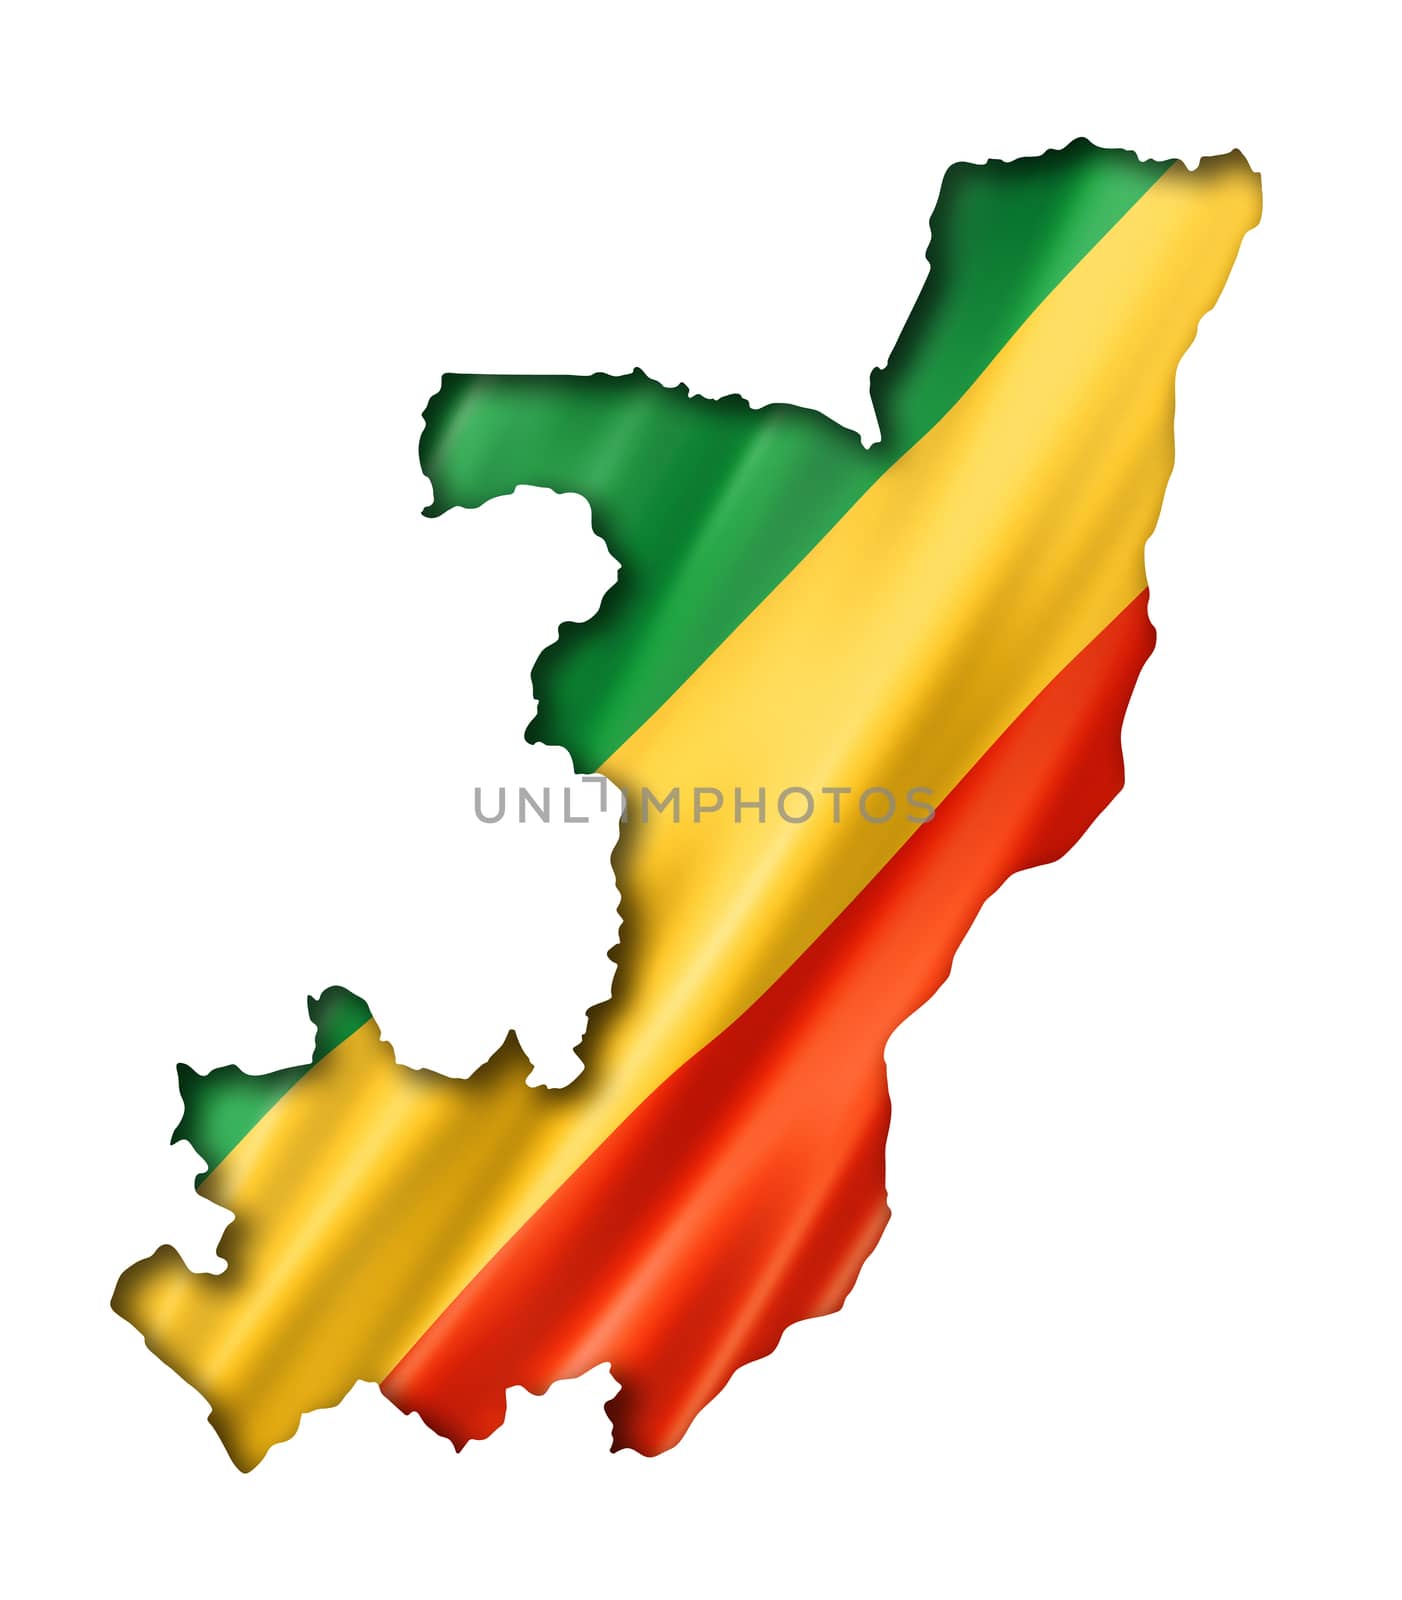 Republic of the Congo flag map, three dimensional render, isolated on white